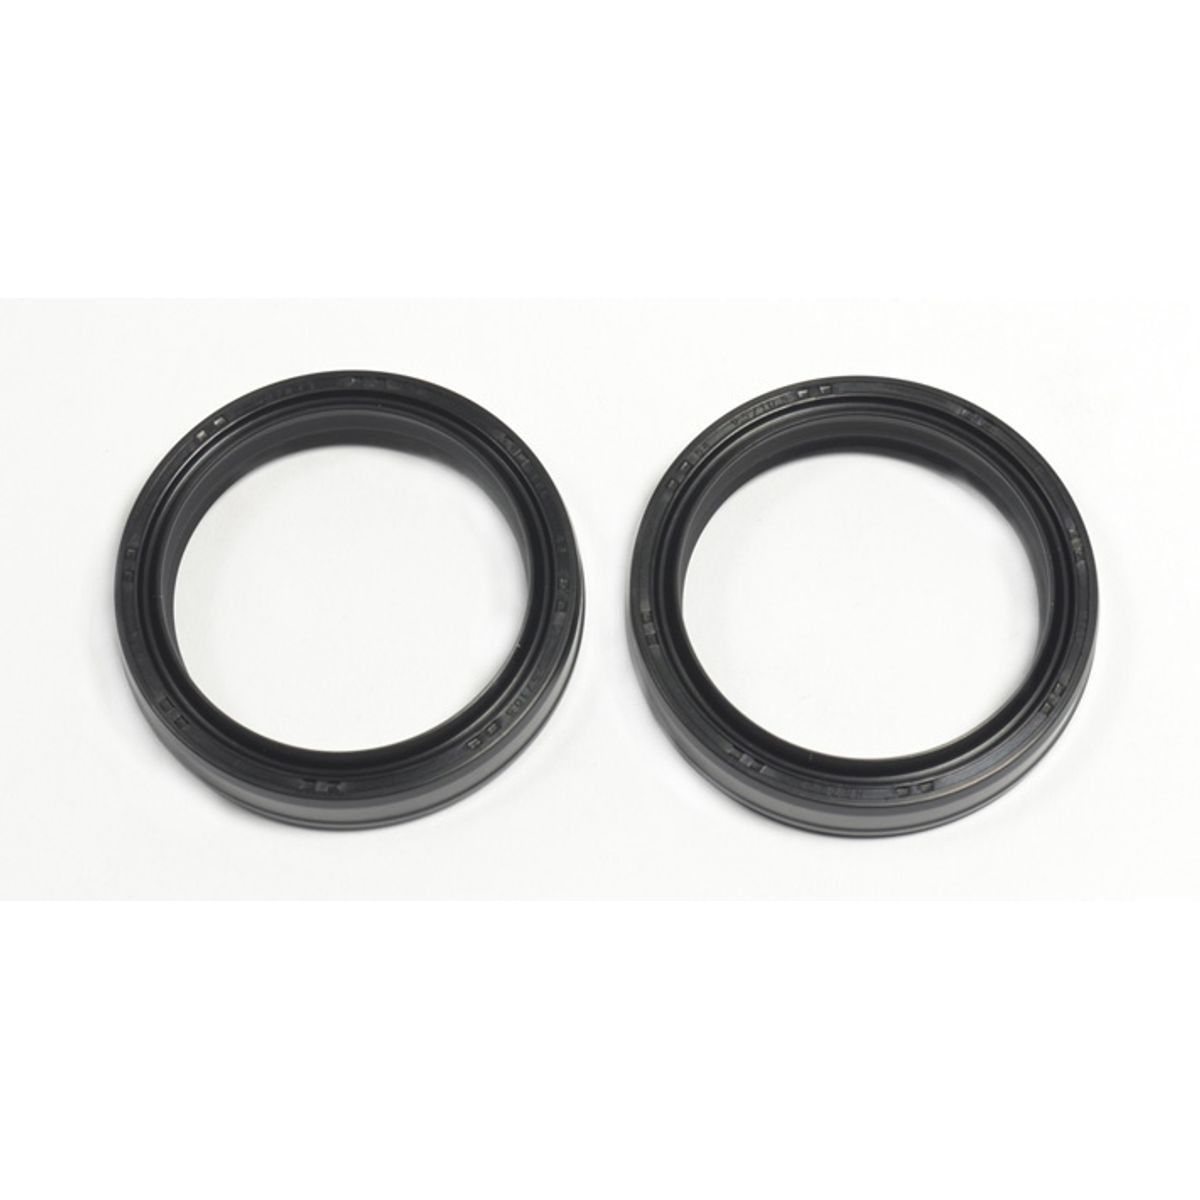 Fork Oil Seal Kit 43x54x9.5/10.5 mm - Replaces Honda 51490-ML3-305 - Click Image to Close